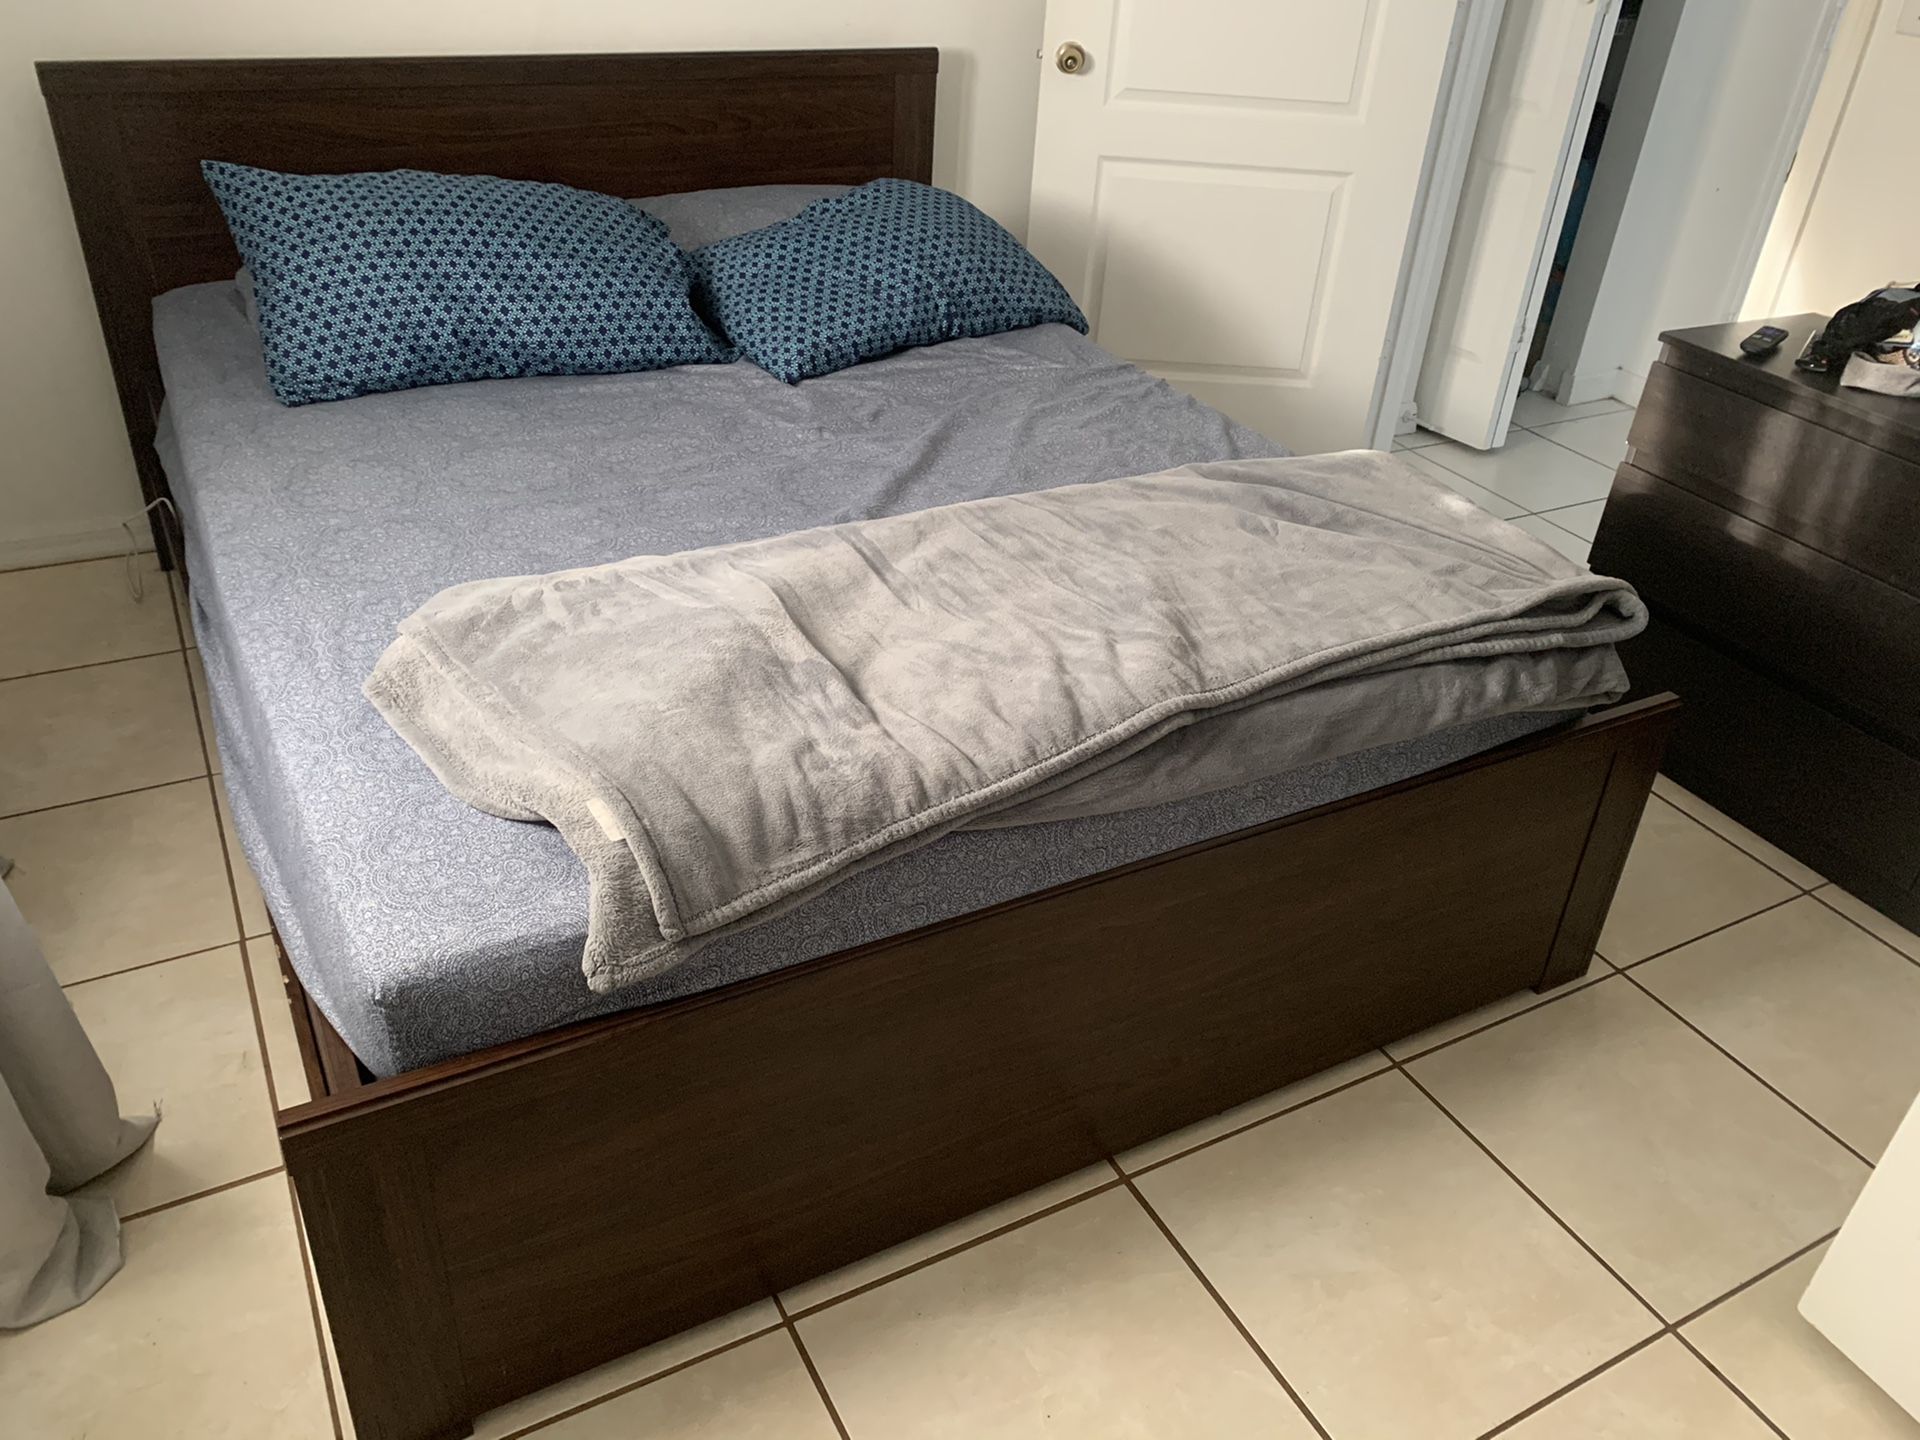 For sale, bed frame queen size, not the mattress!